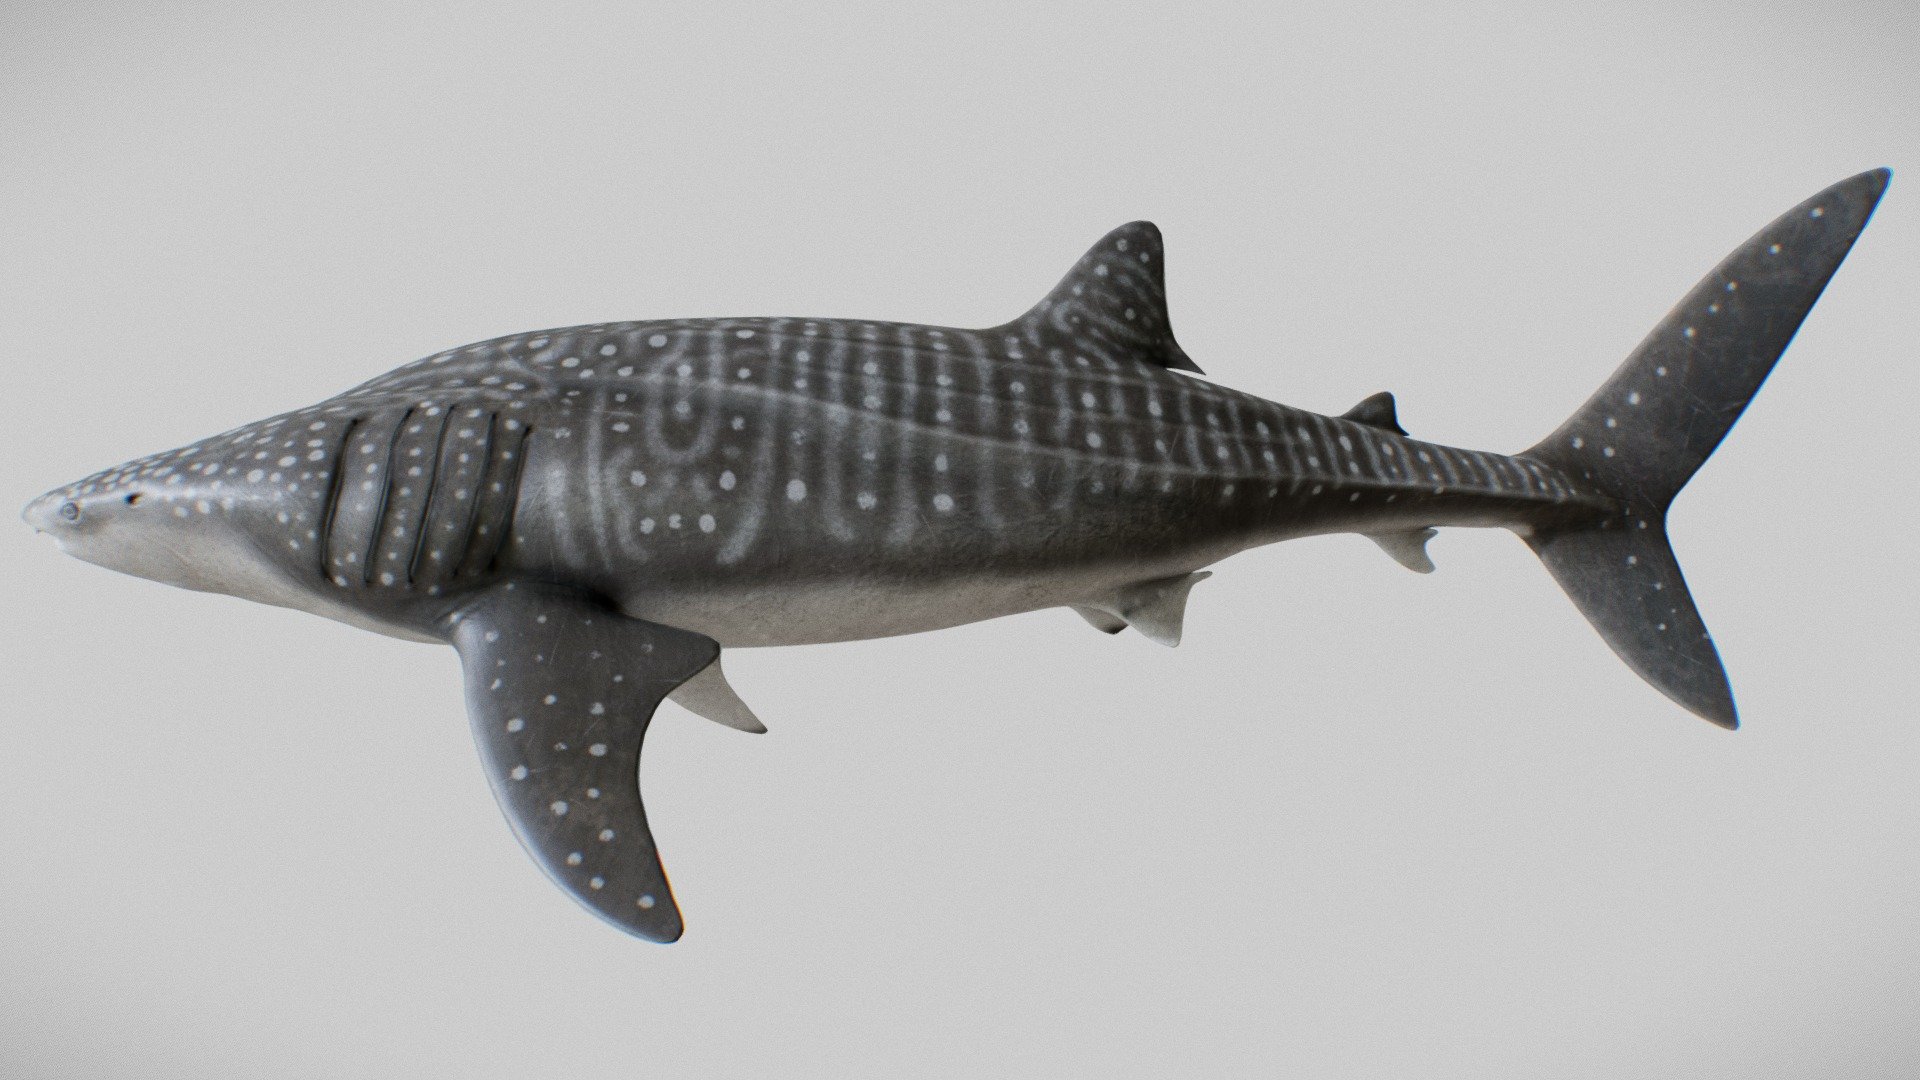 This is a preview of orca or Whale Shark (Rhincodon typus) model for Cinema 4d.

Available on CGtrader.

Here is similar rig in action: https://vimeo.com/182427004

Feel free to contact me if you have any questions or need this model in other formats.
http://rstr.tv/

Thanks for watching.

The whale shark (Rhincodon typus) is a slow-moving, filter-feeding carpet shark and the largest known extant fish species. The largest confirmed individual had a length of 18.8 m (61.7 ft).[9] The whale shark holds many records for size in the animal kingdom, most notably being by far the largest living nonmammalian vertebrate. It is the sole member of the genus Rhincodon and the only extant member of the family Rhincodontidae, which belongs to the subclass Elasmobranchii in the class Chondrichthyes. Before 1984 it was classified as Rhiniodon into Rhinodontidae 3d model